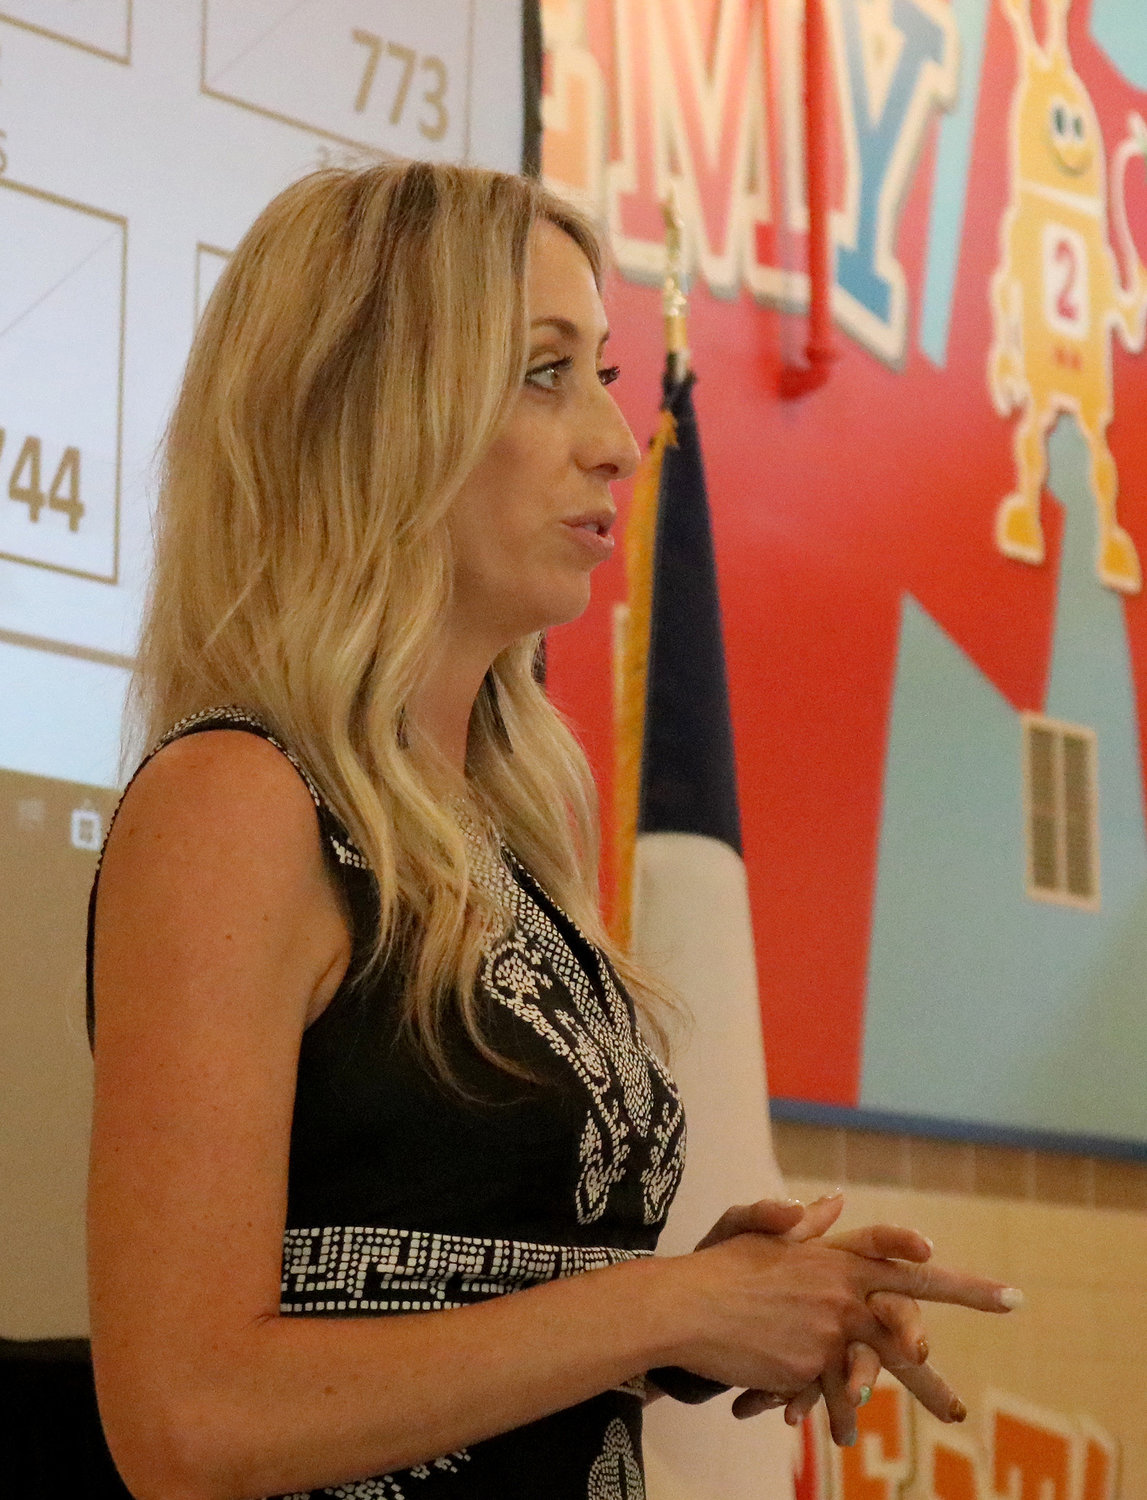 East Avenue Primary Principal Brandi Bell discusses school reconfiguration with the school board Monday evening.